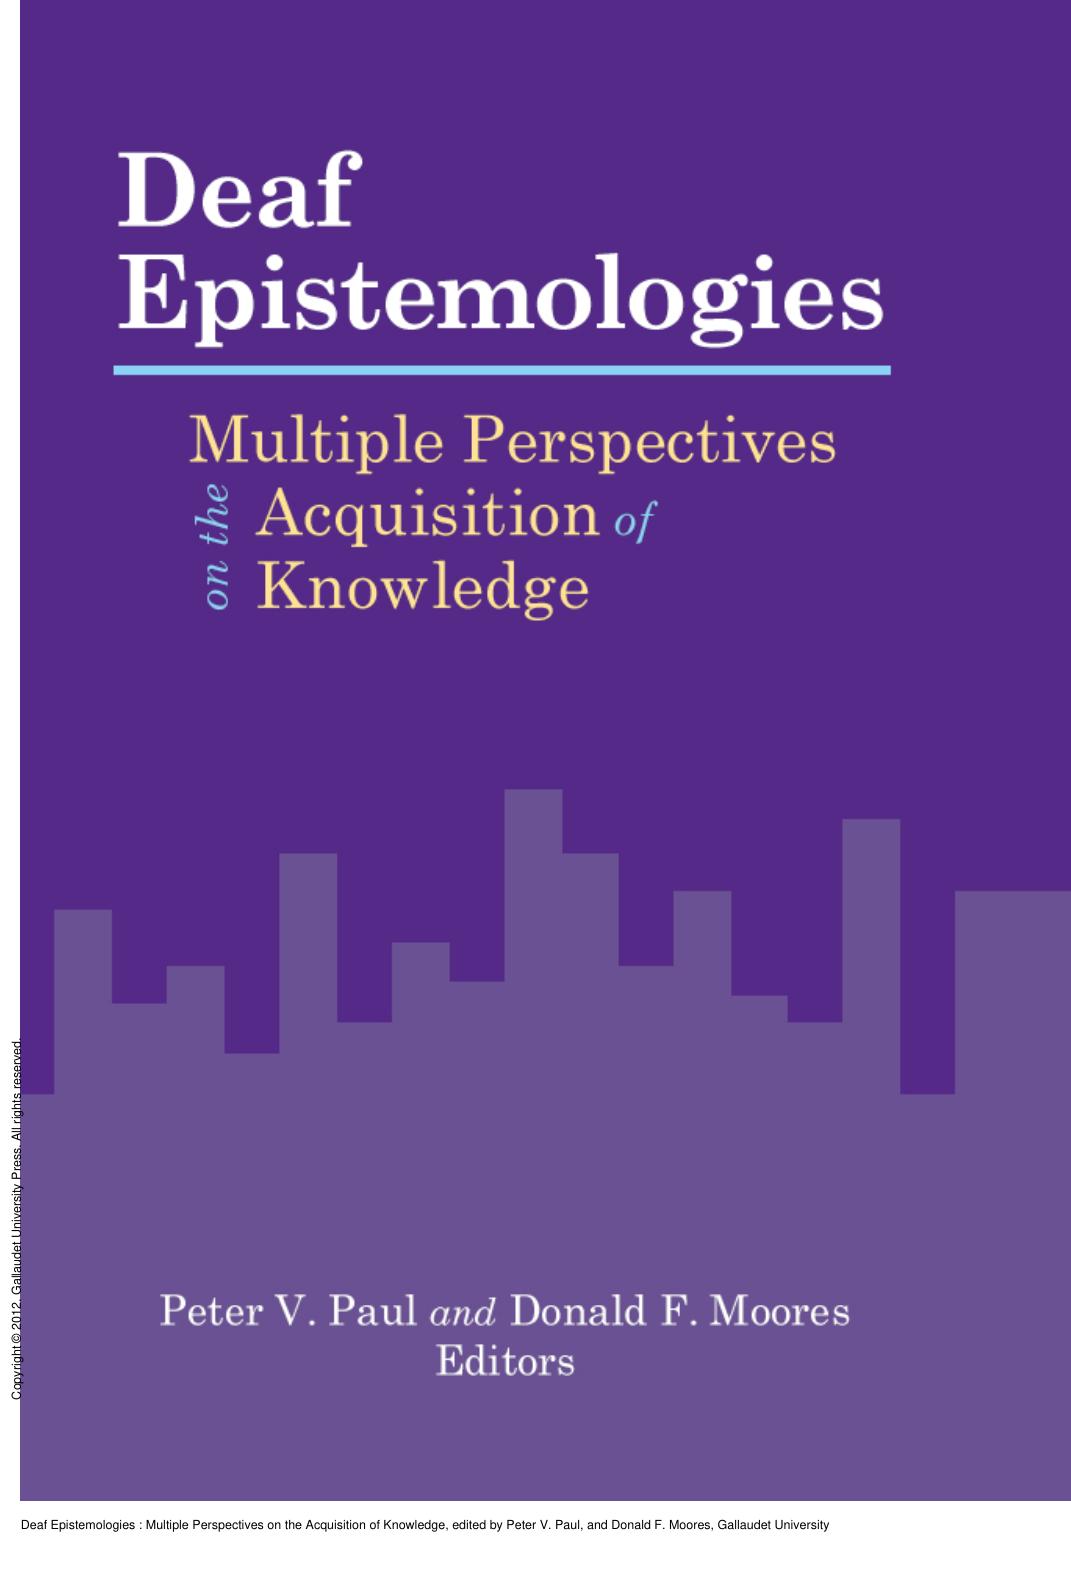 Deaf Epistemologies : Multiple Perspectives on the Acquisition of Knowledge by Peter V. Paul; Donald F. Moores